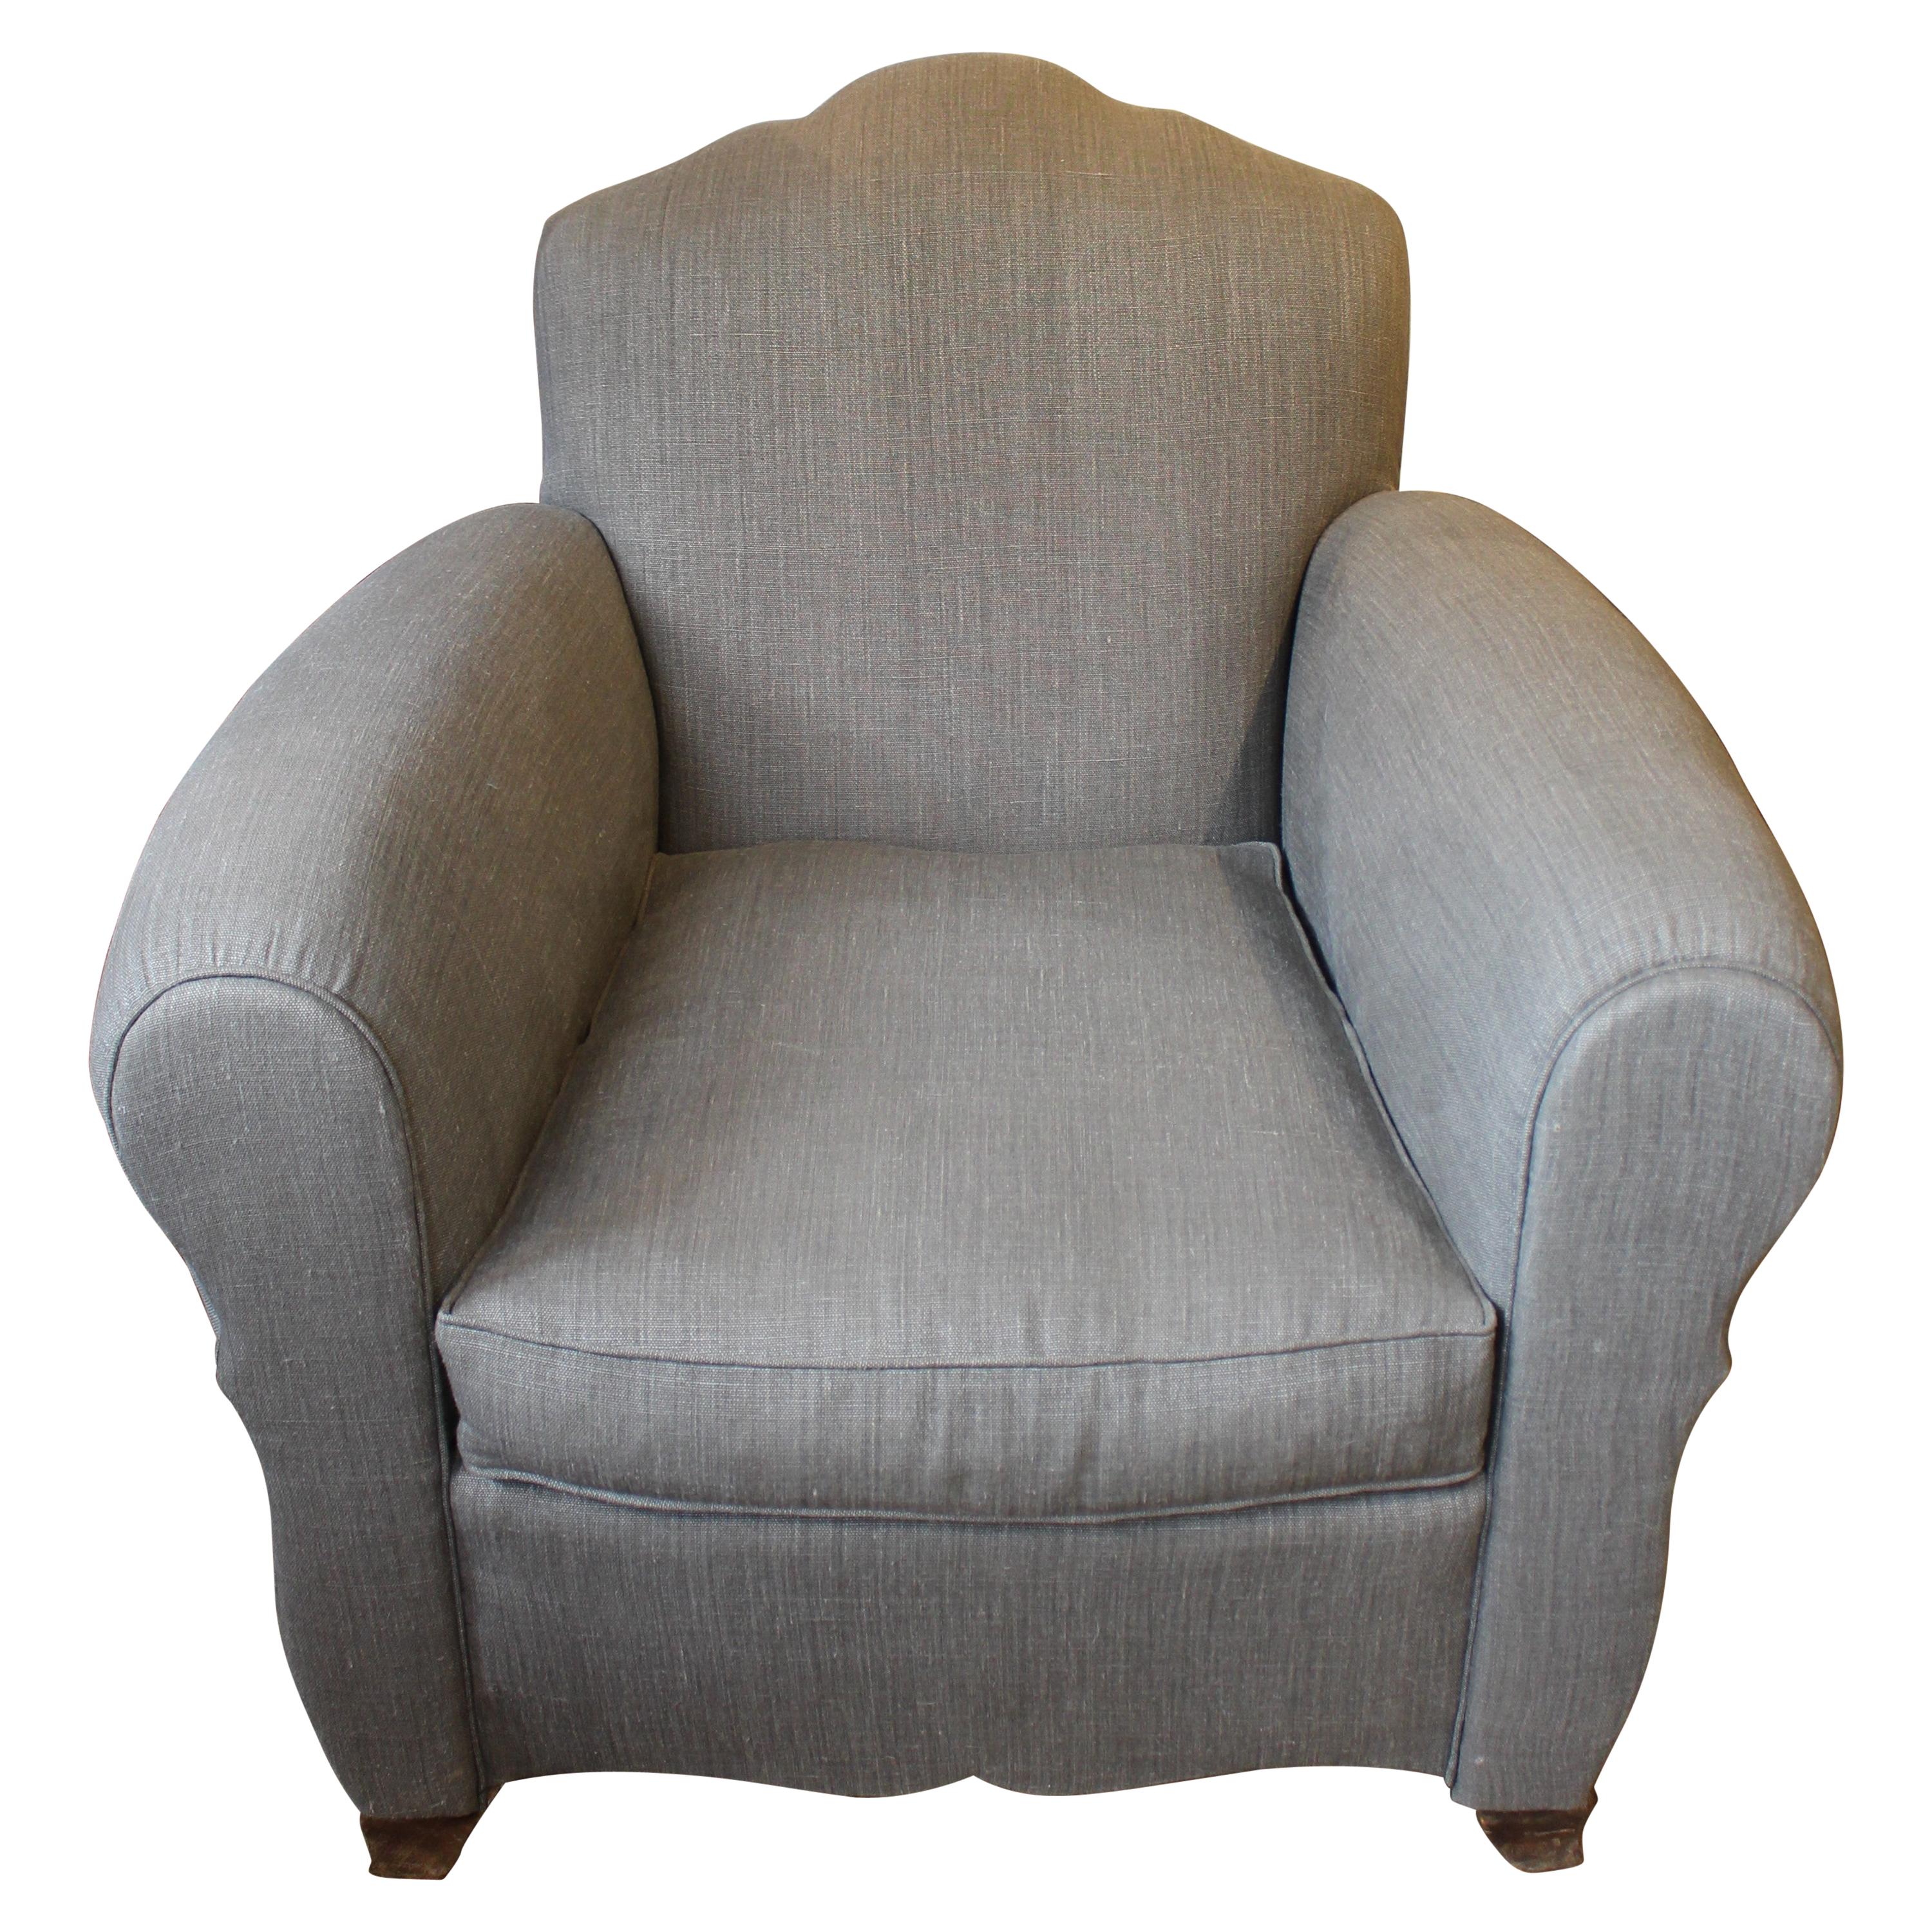 Iconic 1940 French Art Deco Club Chair Armchair Re-Upholstered Grey French Linen For Sale